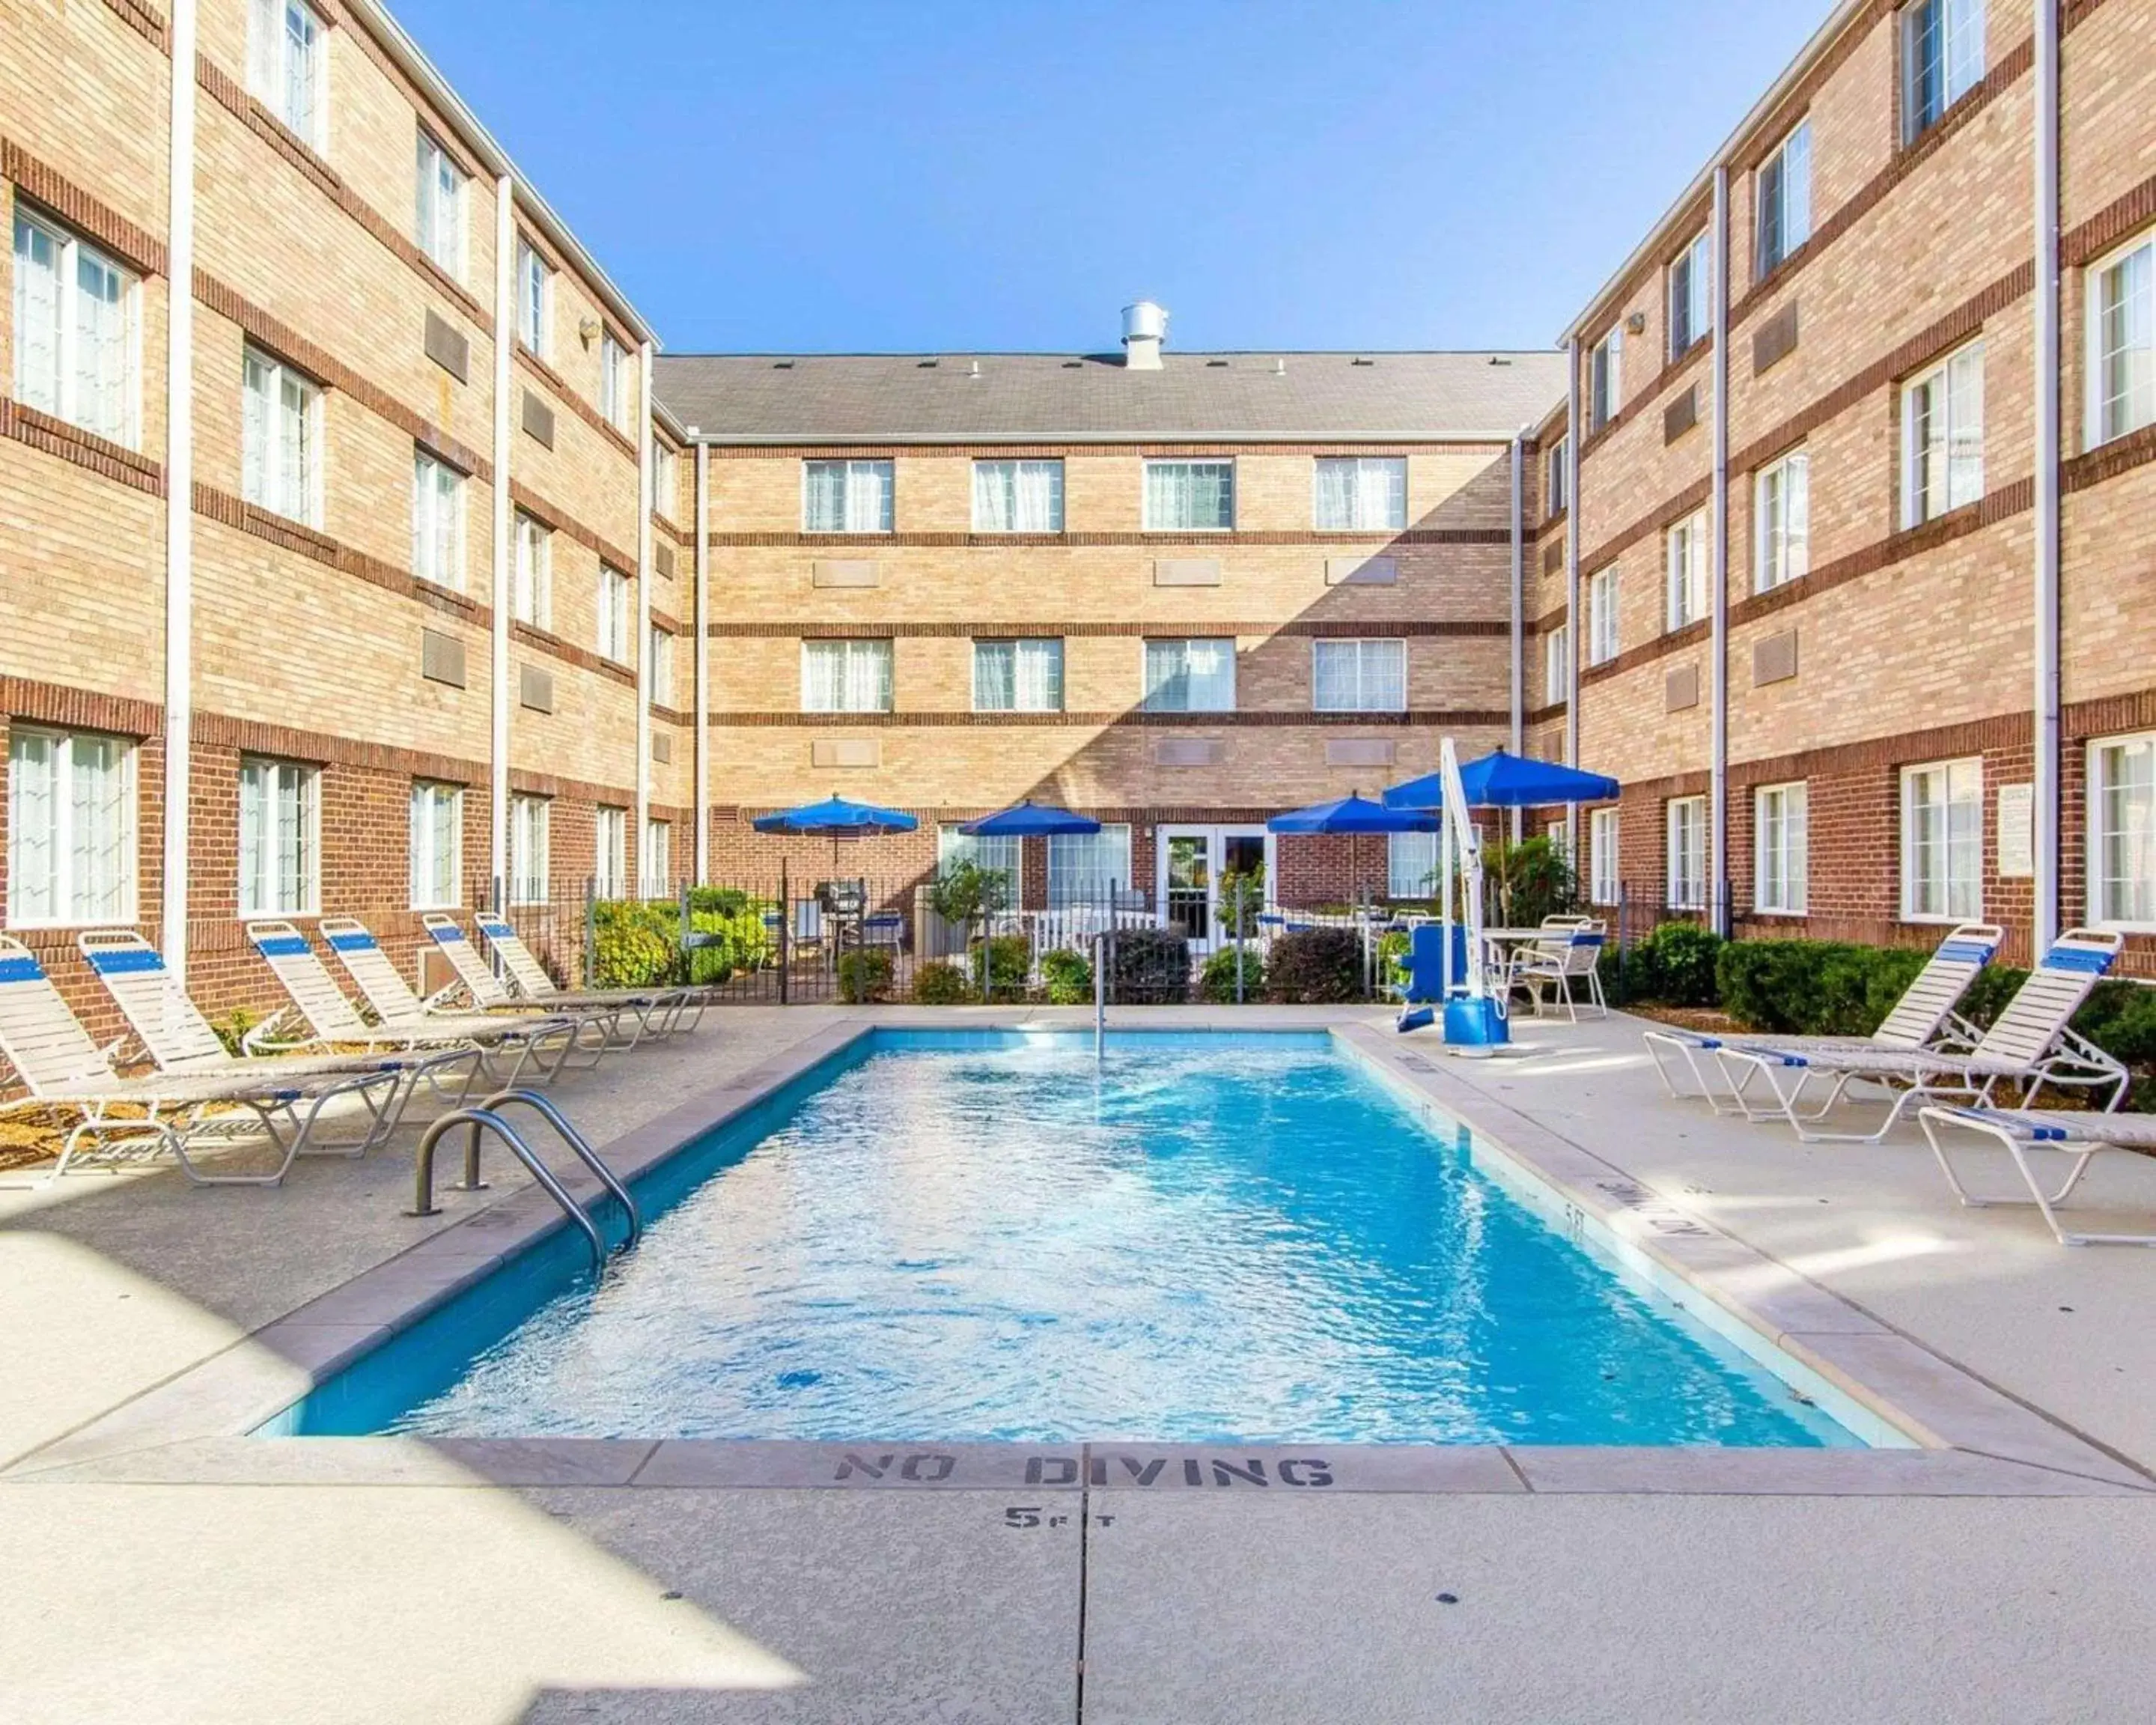 Swimming Pool in MainStay Suites Brentwood-Nashville